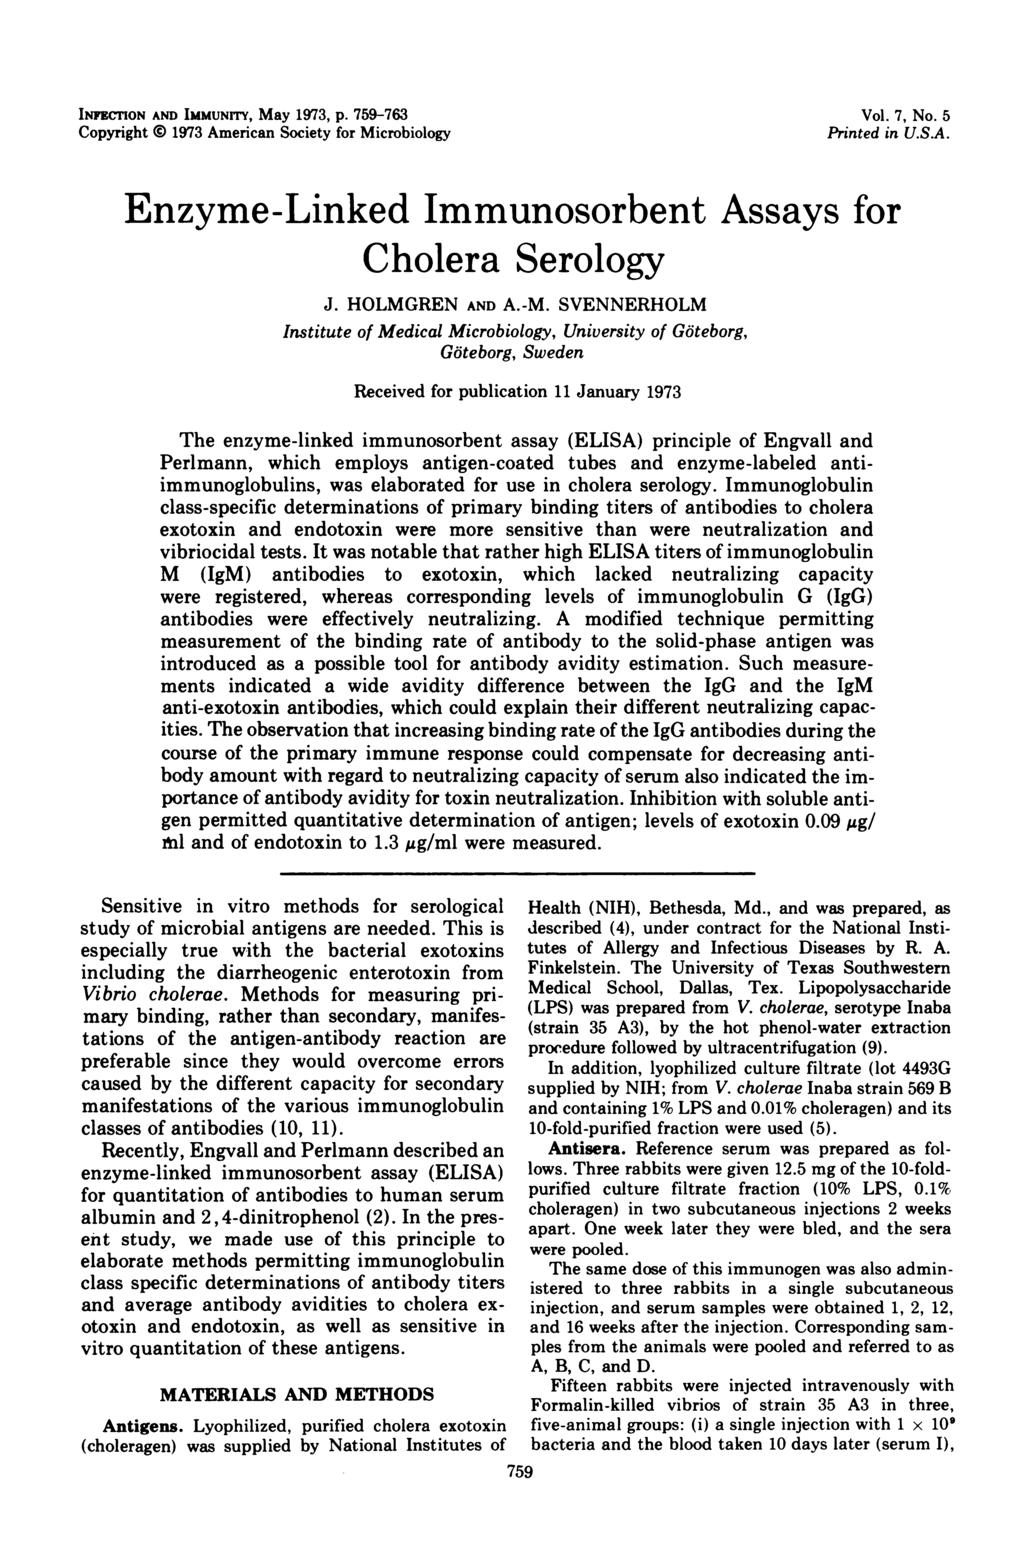 INFECON AND IMMUNrrY, May 1973, p. 759-763 Copyright i 1973 American Society for Microbiology Vol. 7, No. 5 Printed in U.S.A. Enzyme-Linked Immunosorbent Assays for Cholera Serology J. HOLMGREN AND A.